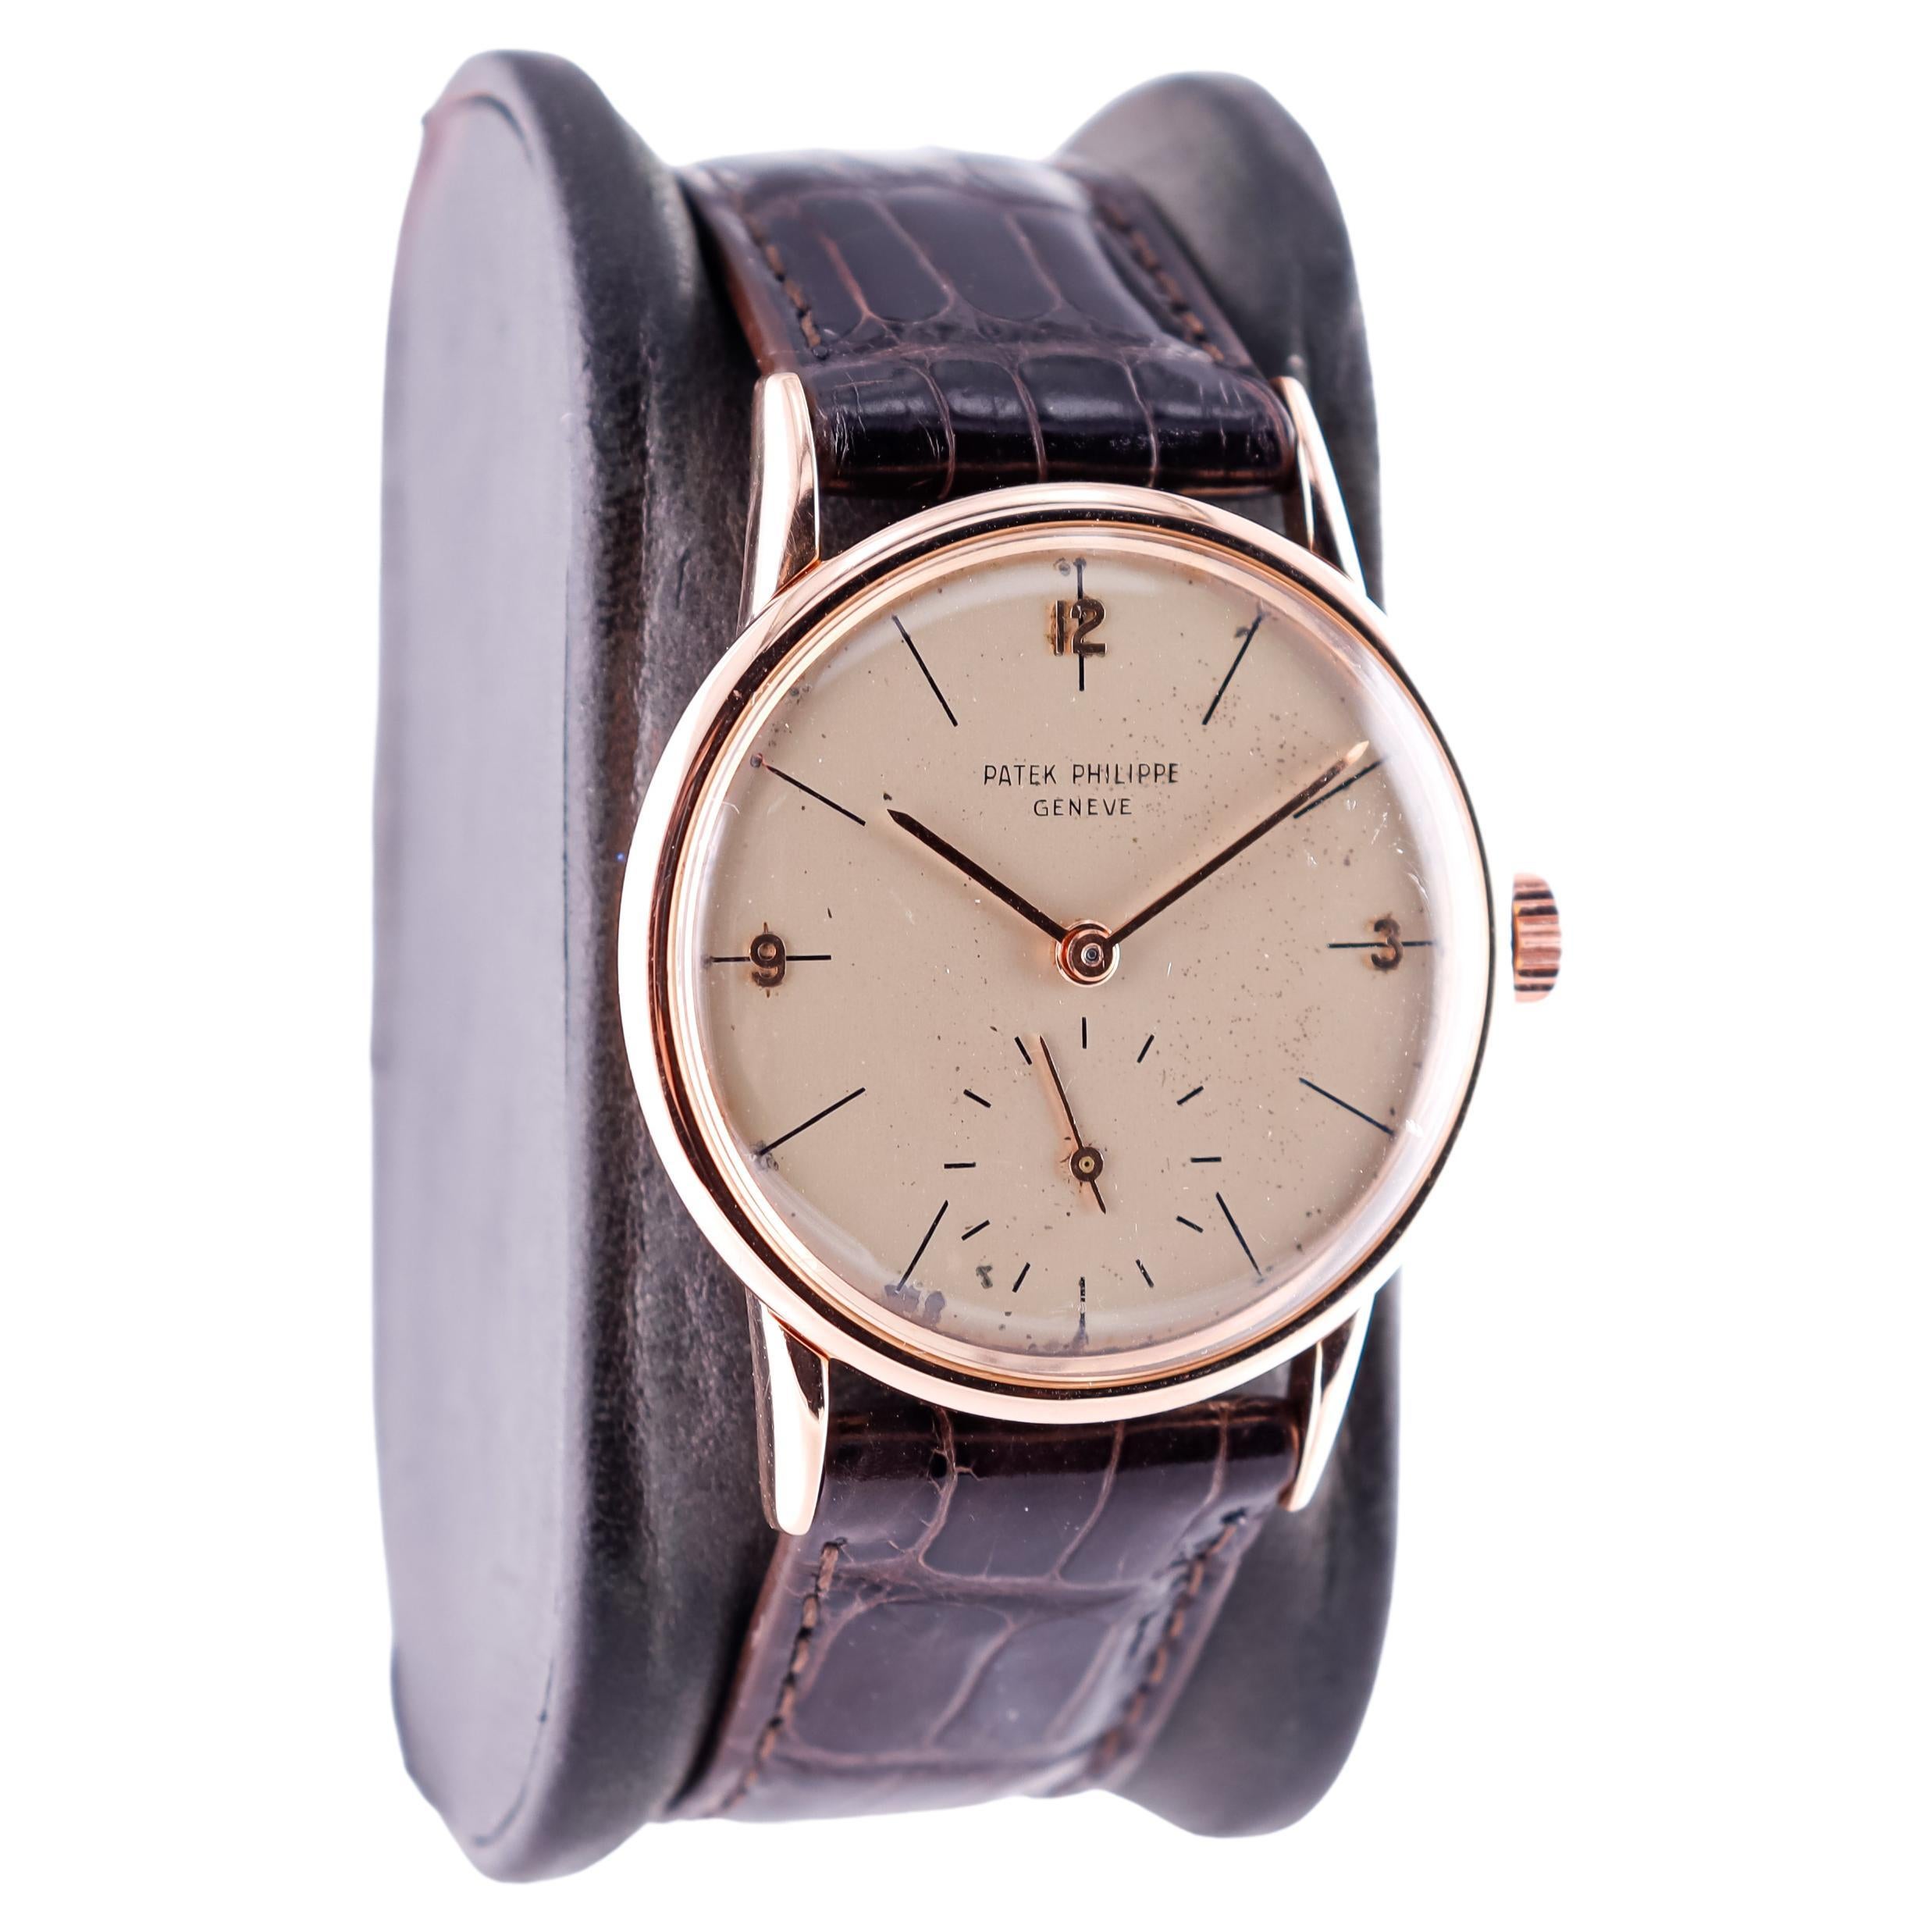 FACTORY / HOUSE: Patek Philippe et Cie.
STYLE / REFERENCE: Round Art Deco  / Reference 2494
METAL / MATERIAL: 18kt Rose Gold 
CIRCA / YEAR: 1940's
DIMENSIONS / SIZE: 41 Length X 33 Diameter
MOVEMENT / CALIBER:  Manual Winding / 18 Jewels 
DIAL /